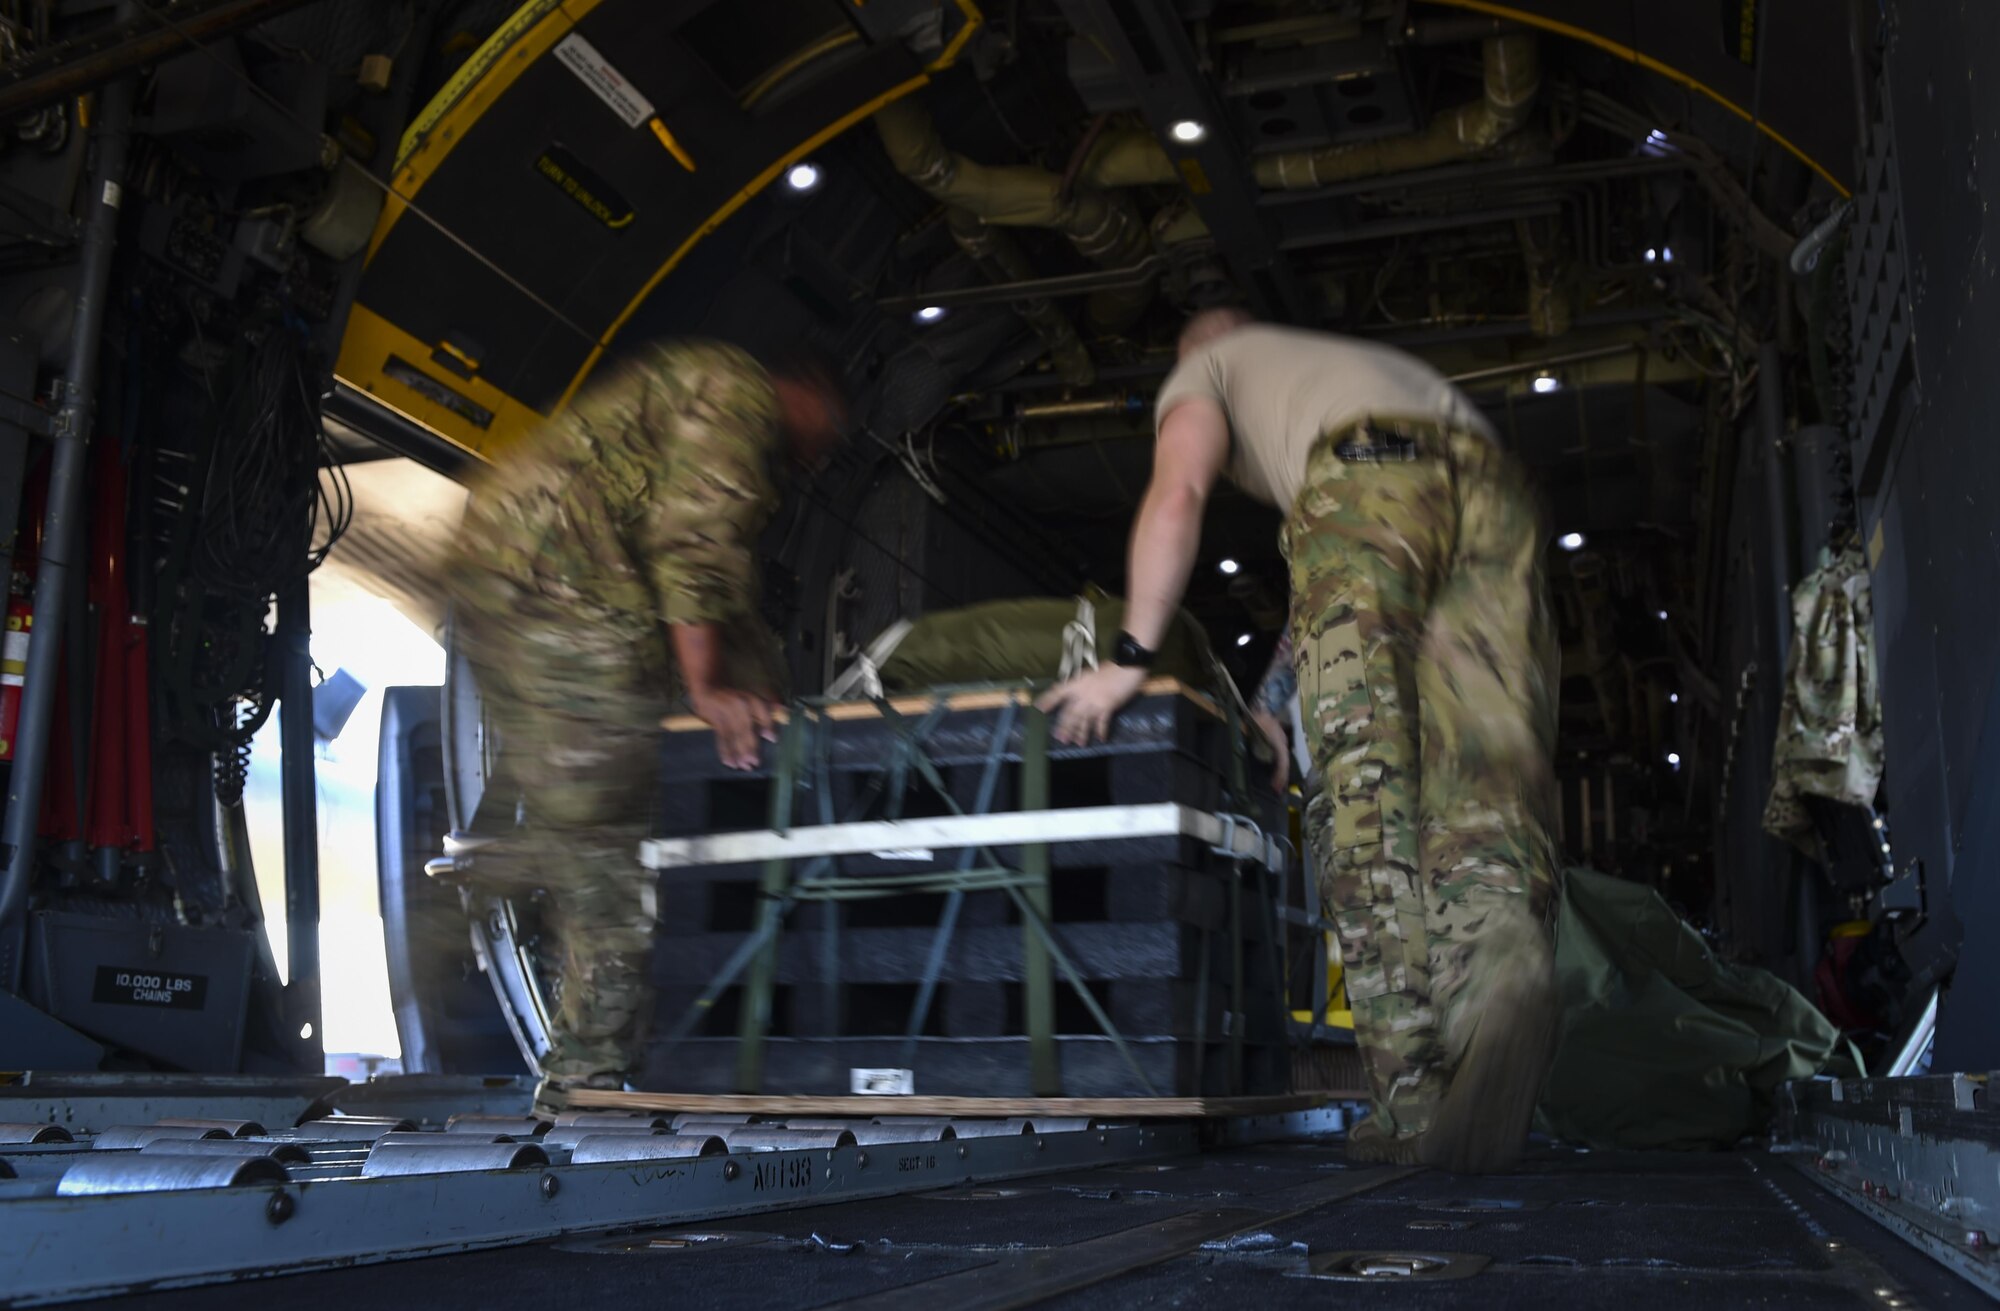 Loadmasters with the 15th Special Operations Squadron transport a container delivery system onto an MC-130 Combat Talon II at Hurlburt Field, Fla., April 7, 2017. The container delivery system is the most commonly used method for the quick, aerial insertion of supplies for military operations ensuring global reach anytime, anyplace. (U.S. Air Force photo by Airman 1st Class Joseph Pick)